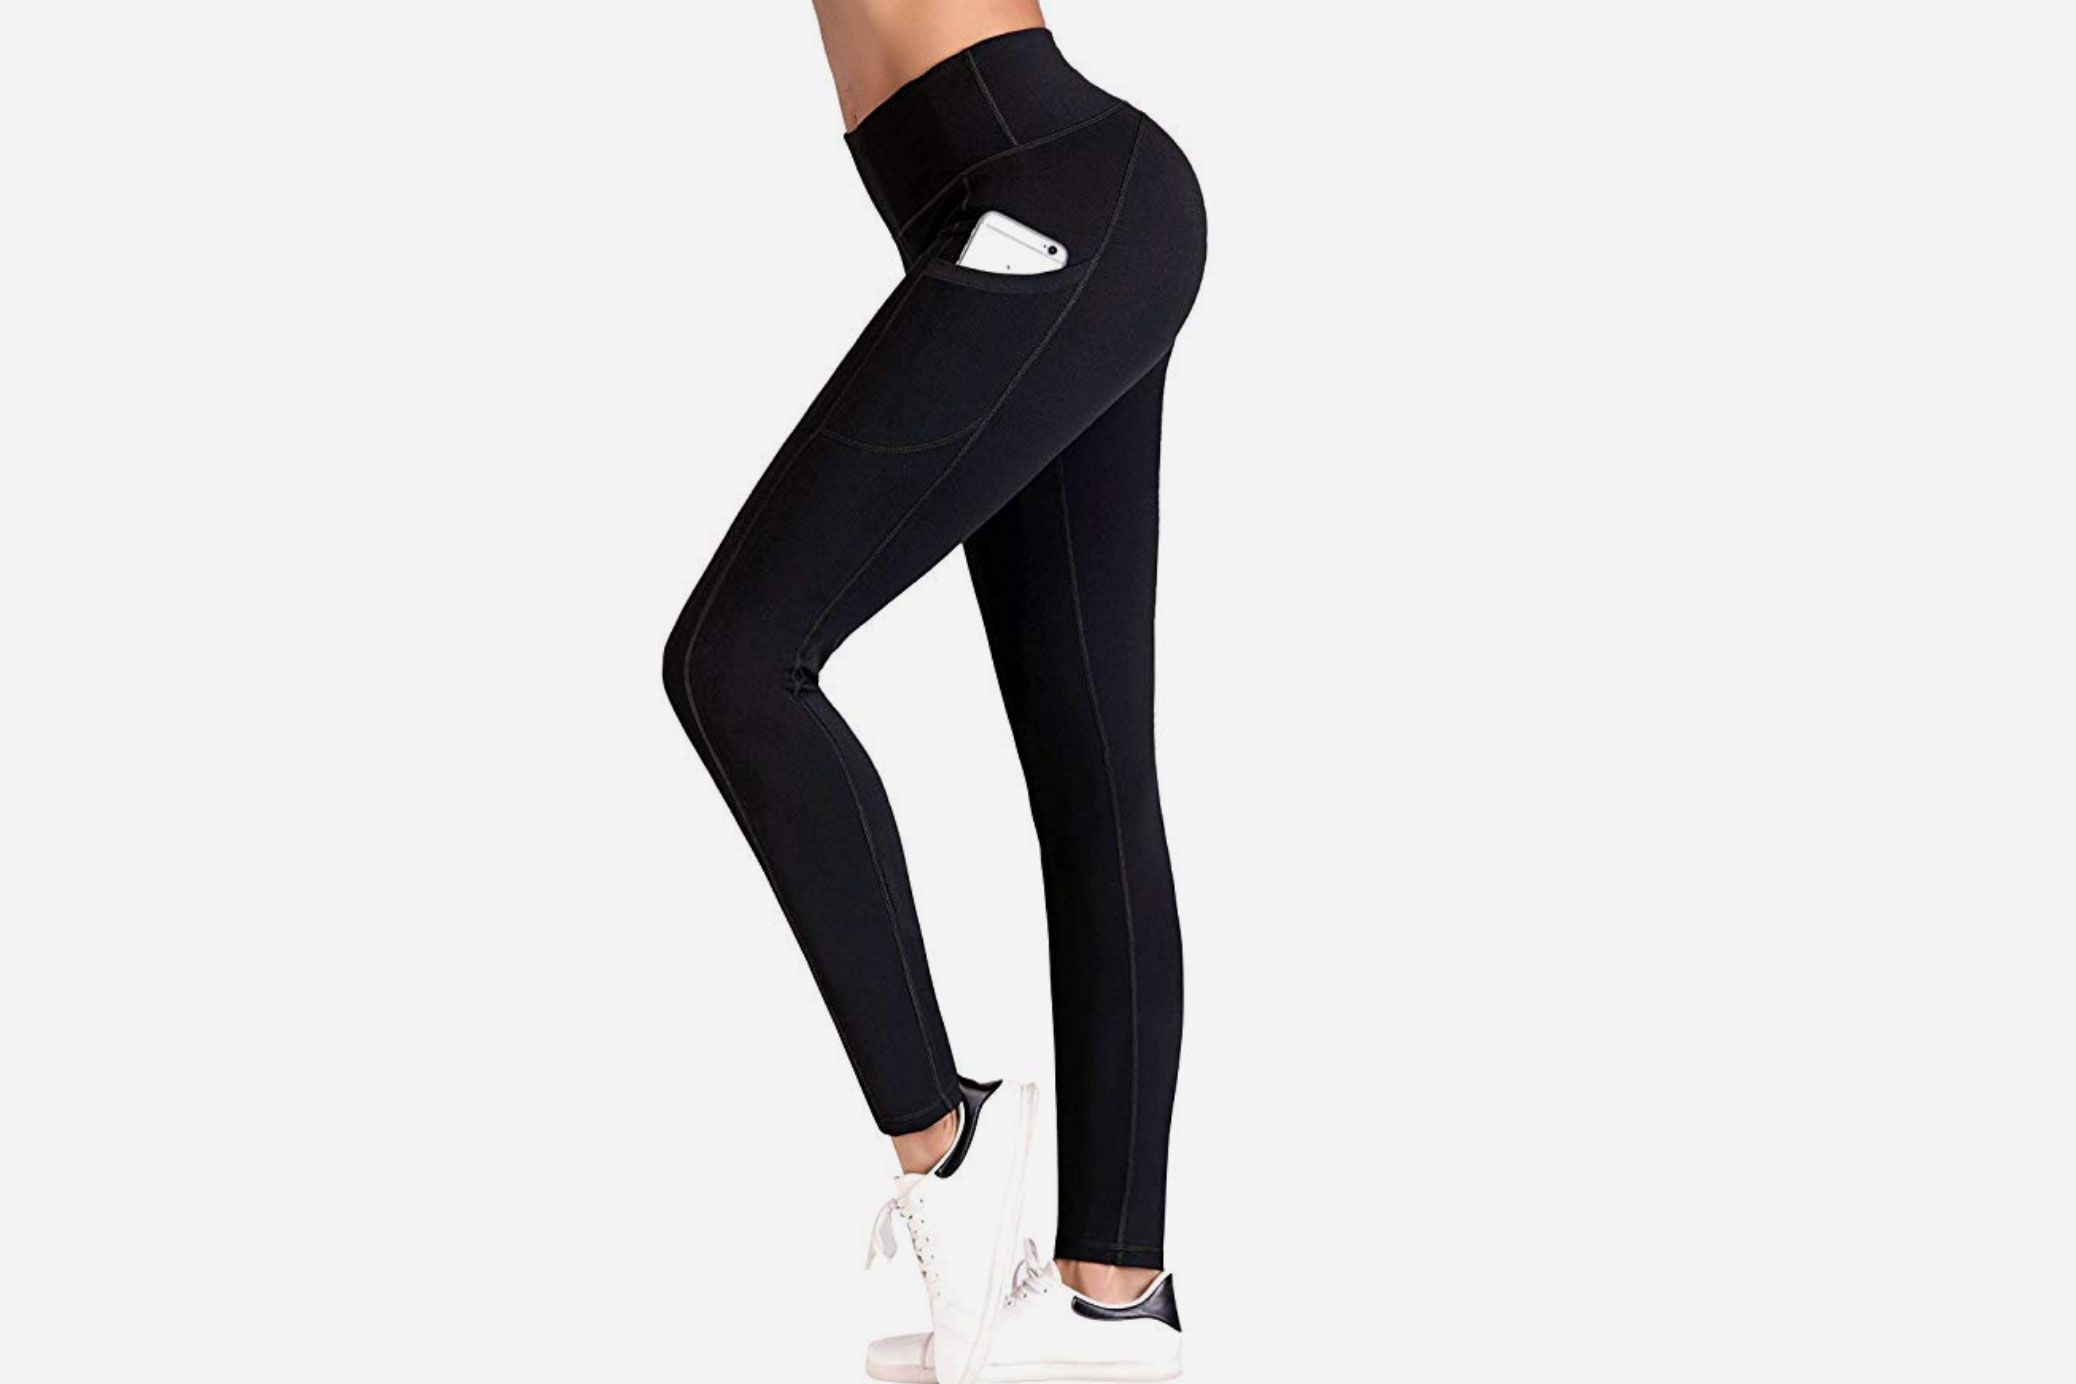 10 lightweight and breathable workout leggings for summer - Reviewed